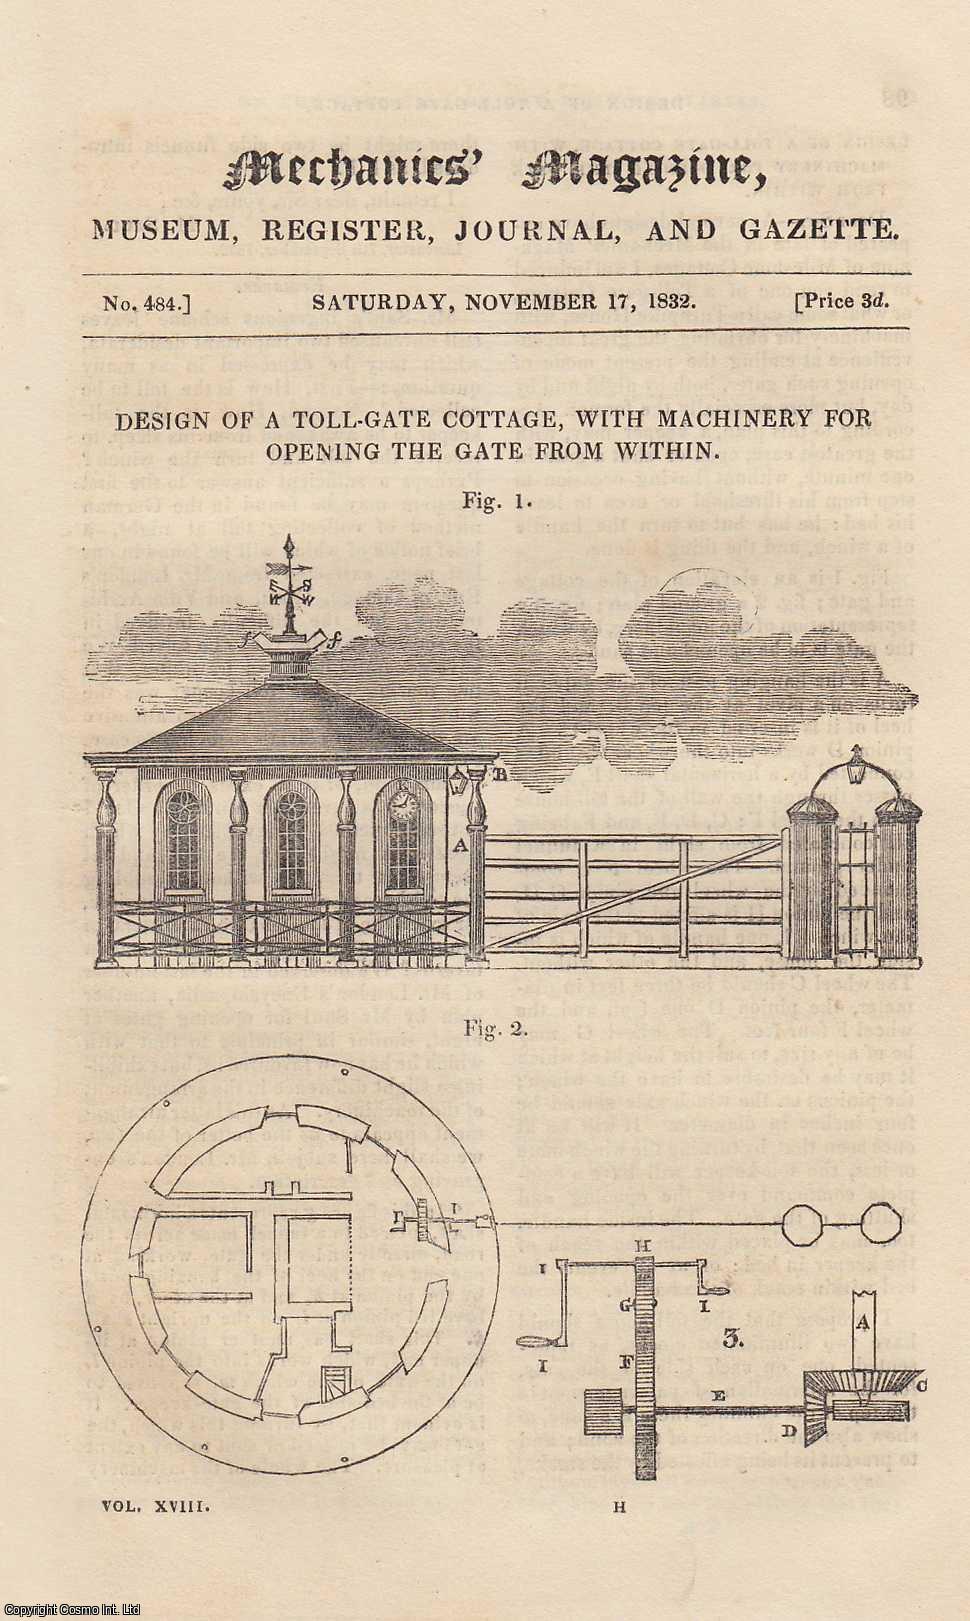 --- - Design of a Toll-Gate Cottage, With Machinery For Opening The Gate From Within; The Education of The Working Classes; Friction Clutch-Box For Adjusting The Connection Between a Constant-Going Wheel & Intermitting Machinery; Drewry's Memoir on Suspension Bridges, etc. Mechanics Magazine, Museum, Register, Journal and Gazette. Issue No. 484. A complete rare weekly issue of the Mechanics' Magazine, 1832.